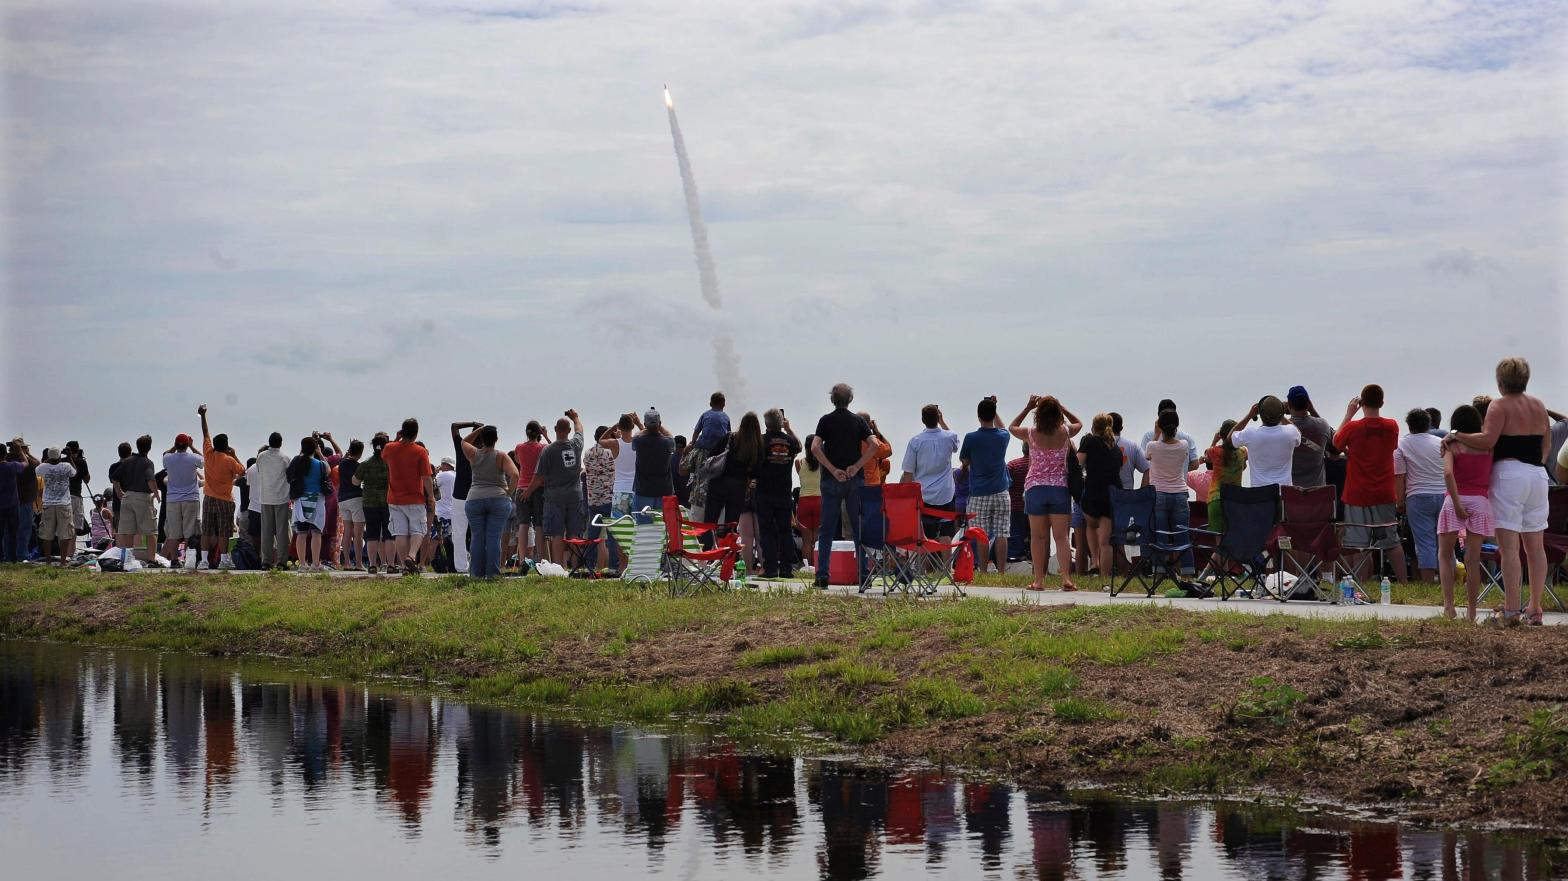 Spectators watch the Space Shuttle Atlantis blasting off on July 8, 2011. The launch was the 135th and final Space Shuttle launch for NASA.  (Photo: Phil Sandlin, AP)